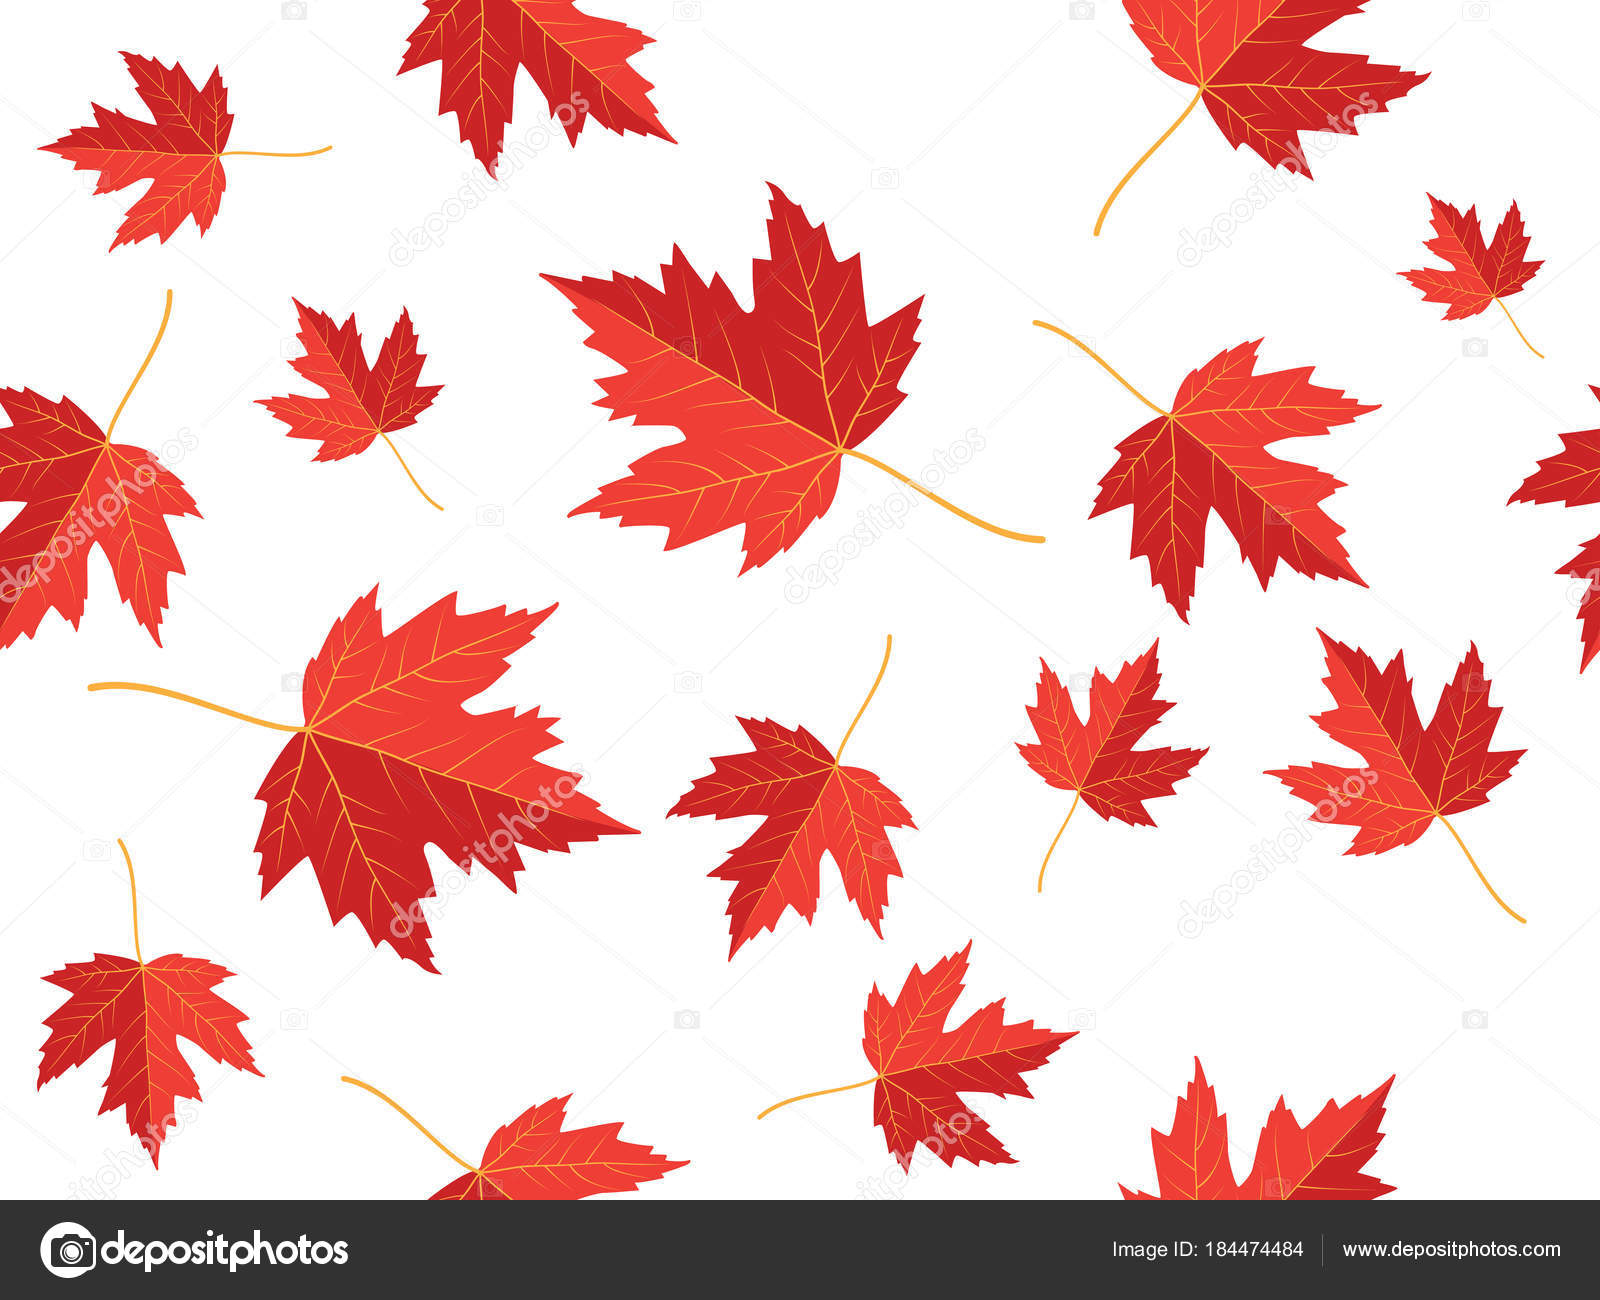 Red Maple Leaf Background - 1600x1300 Wallpaper 